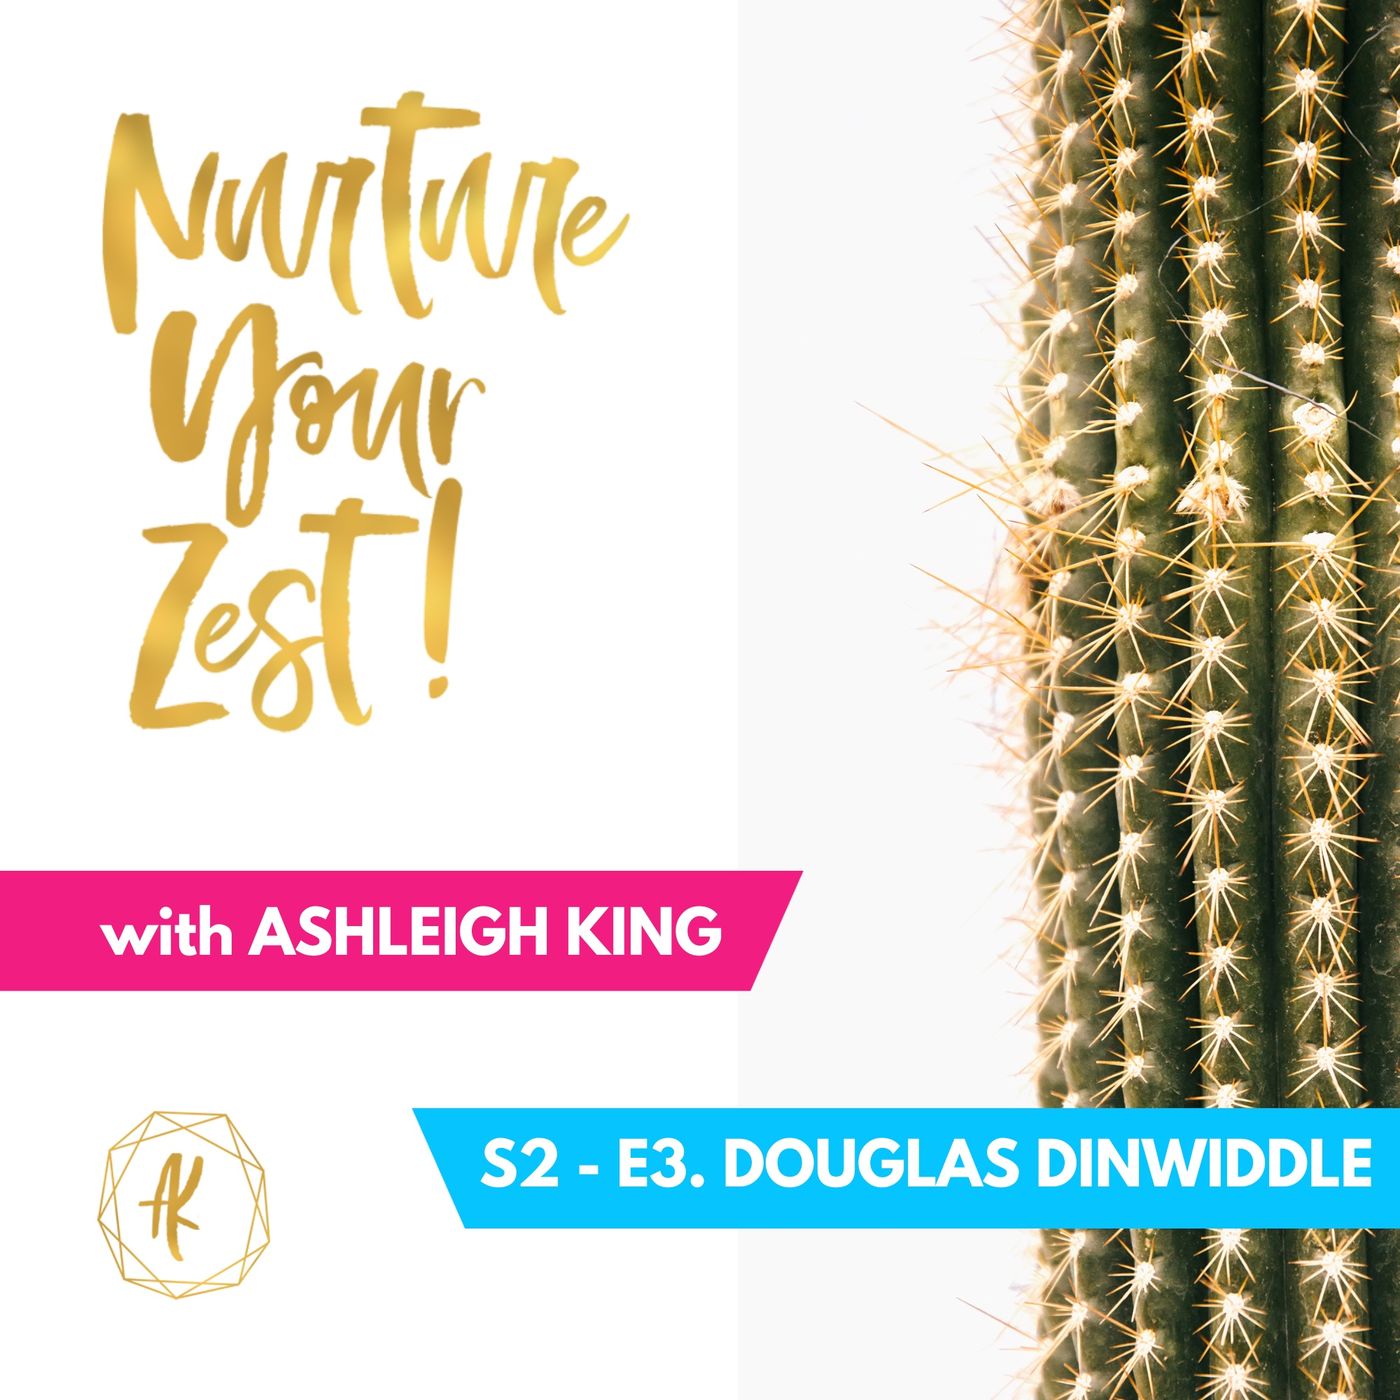 #Nurture Your Zest-S2-E3 Douglas Dinwiddie, White Digital, on books, golf and leading teams with Ashleigh King